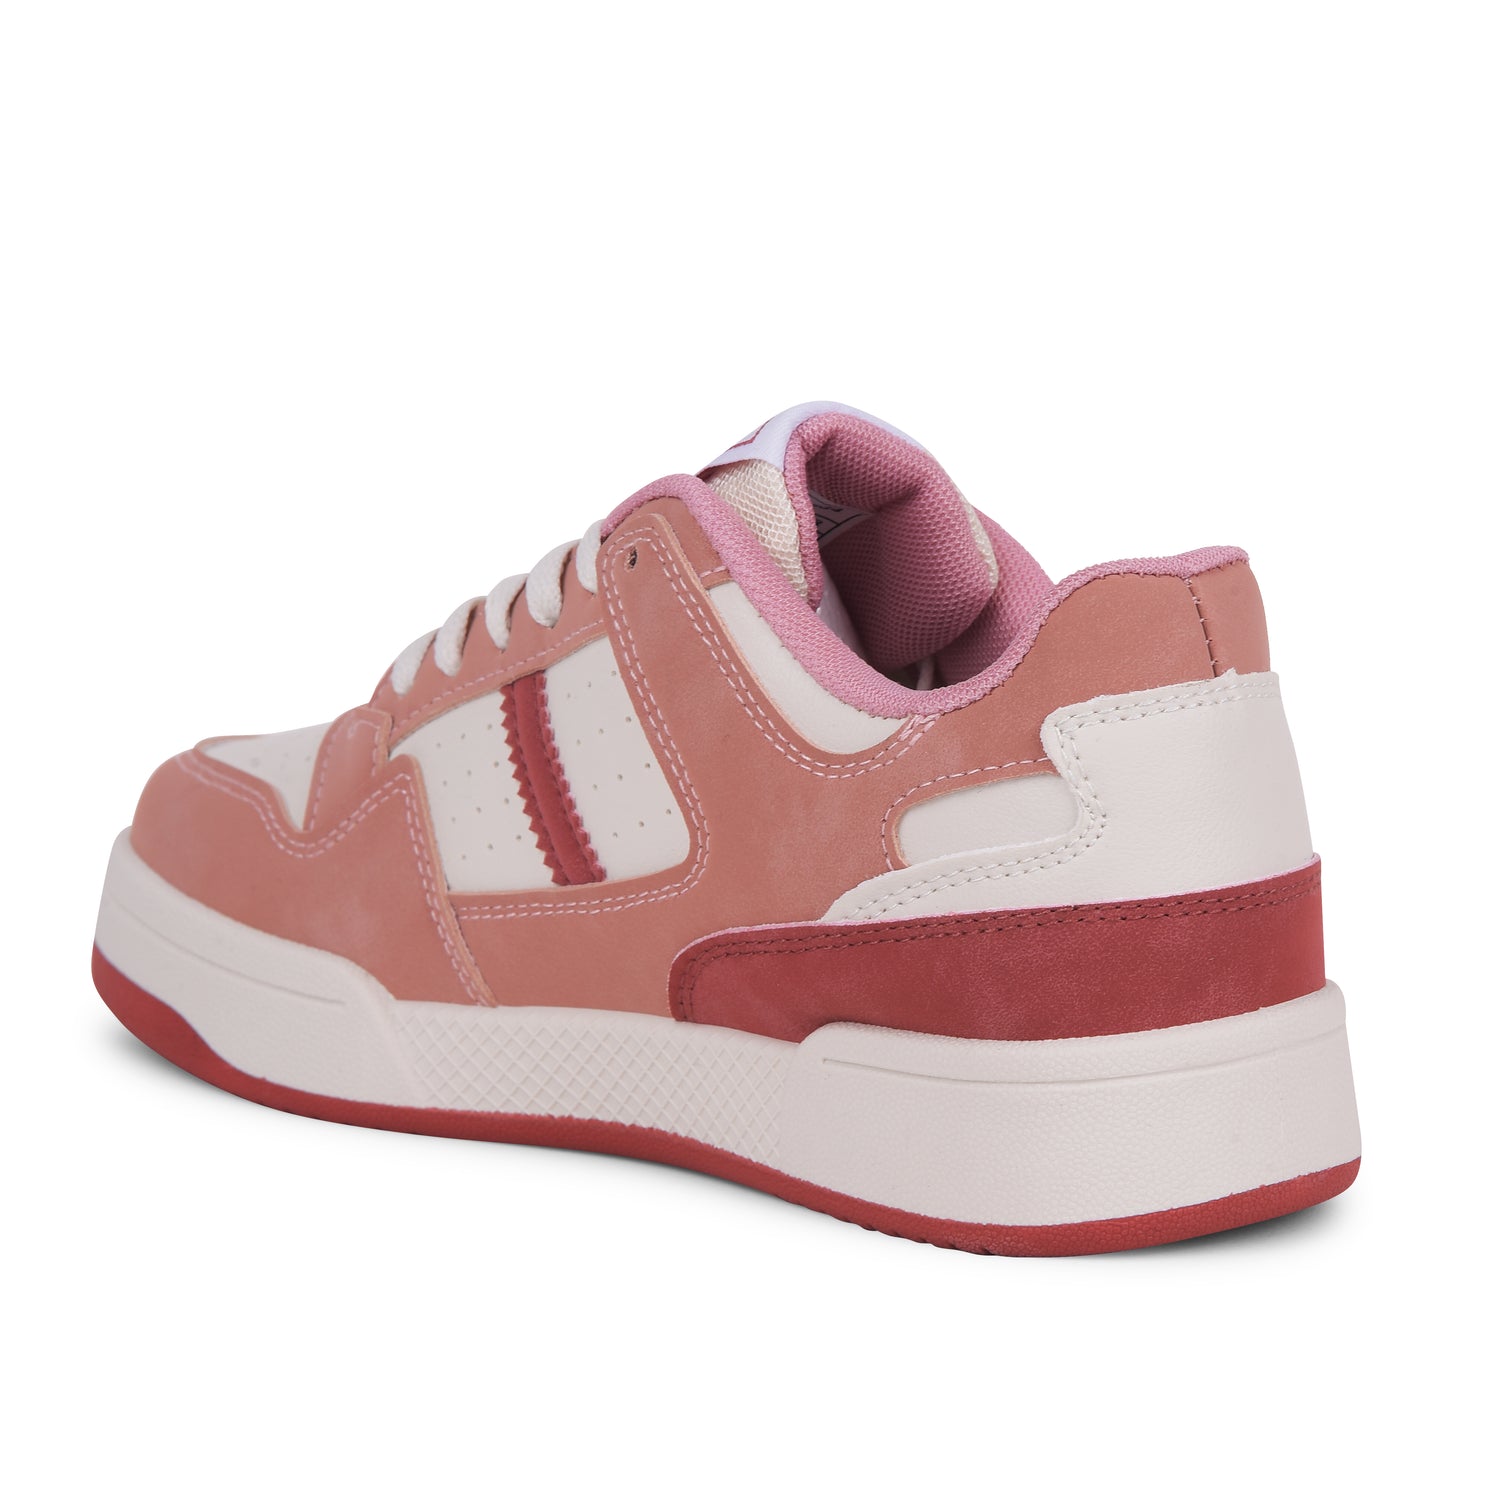 Calcetto CLT-9834 D Pink Sneaker For Women